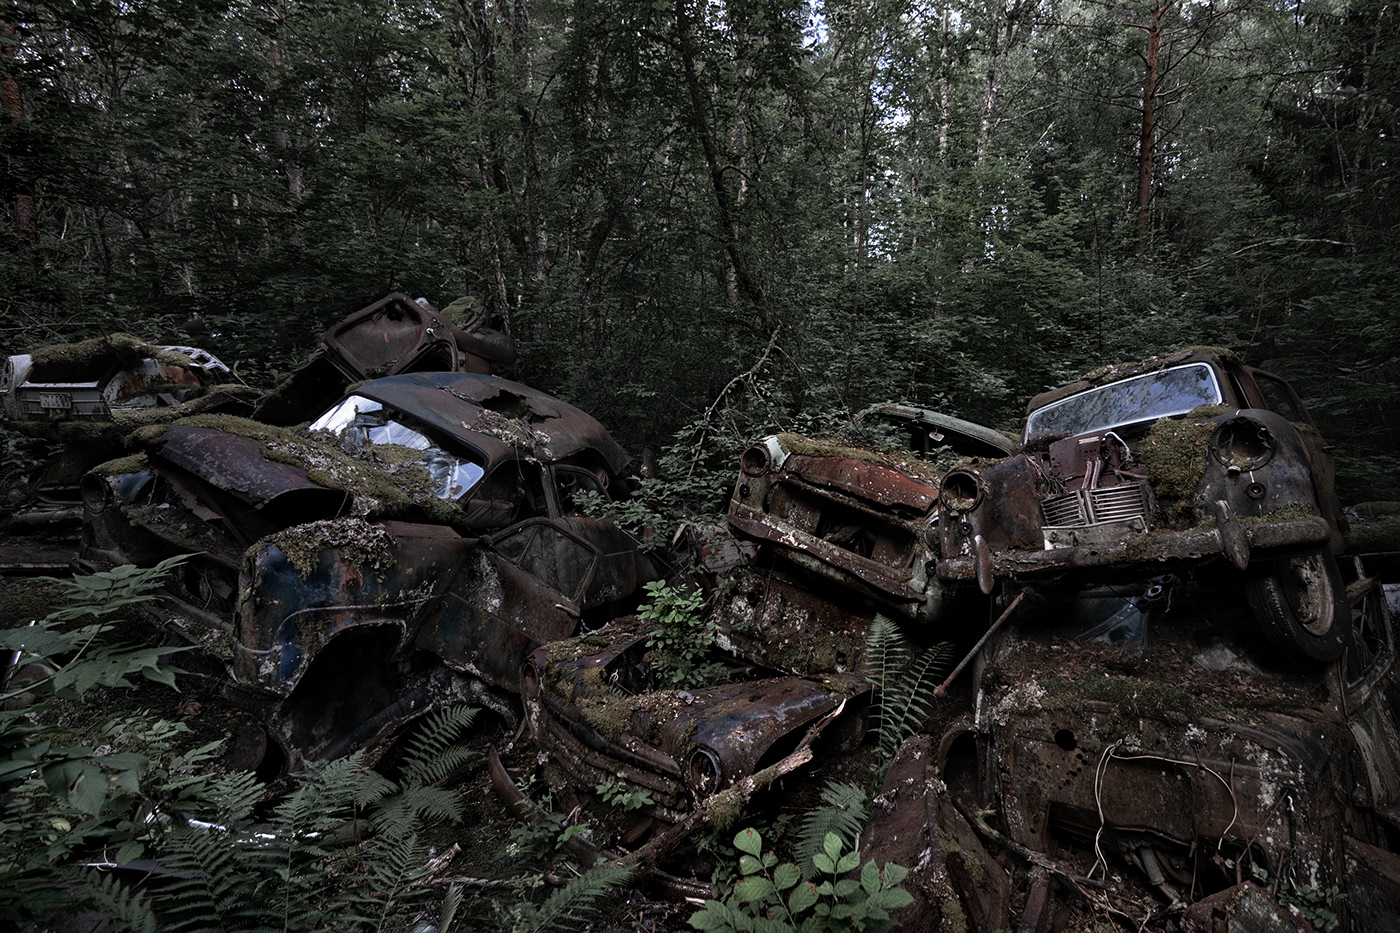 abandoned automobile Cars clandestine residence decay forgotten old trees woods landscape photography